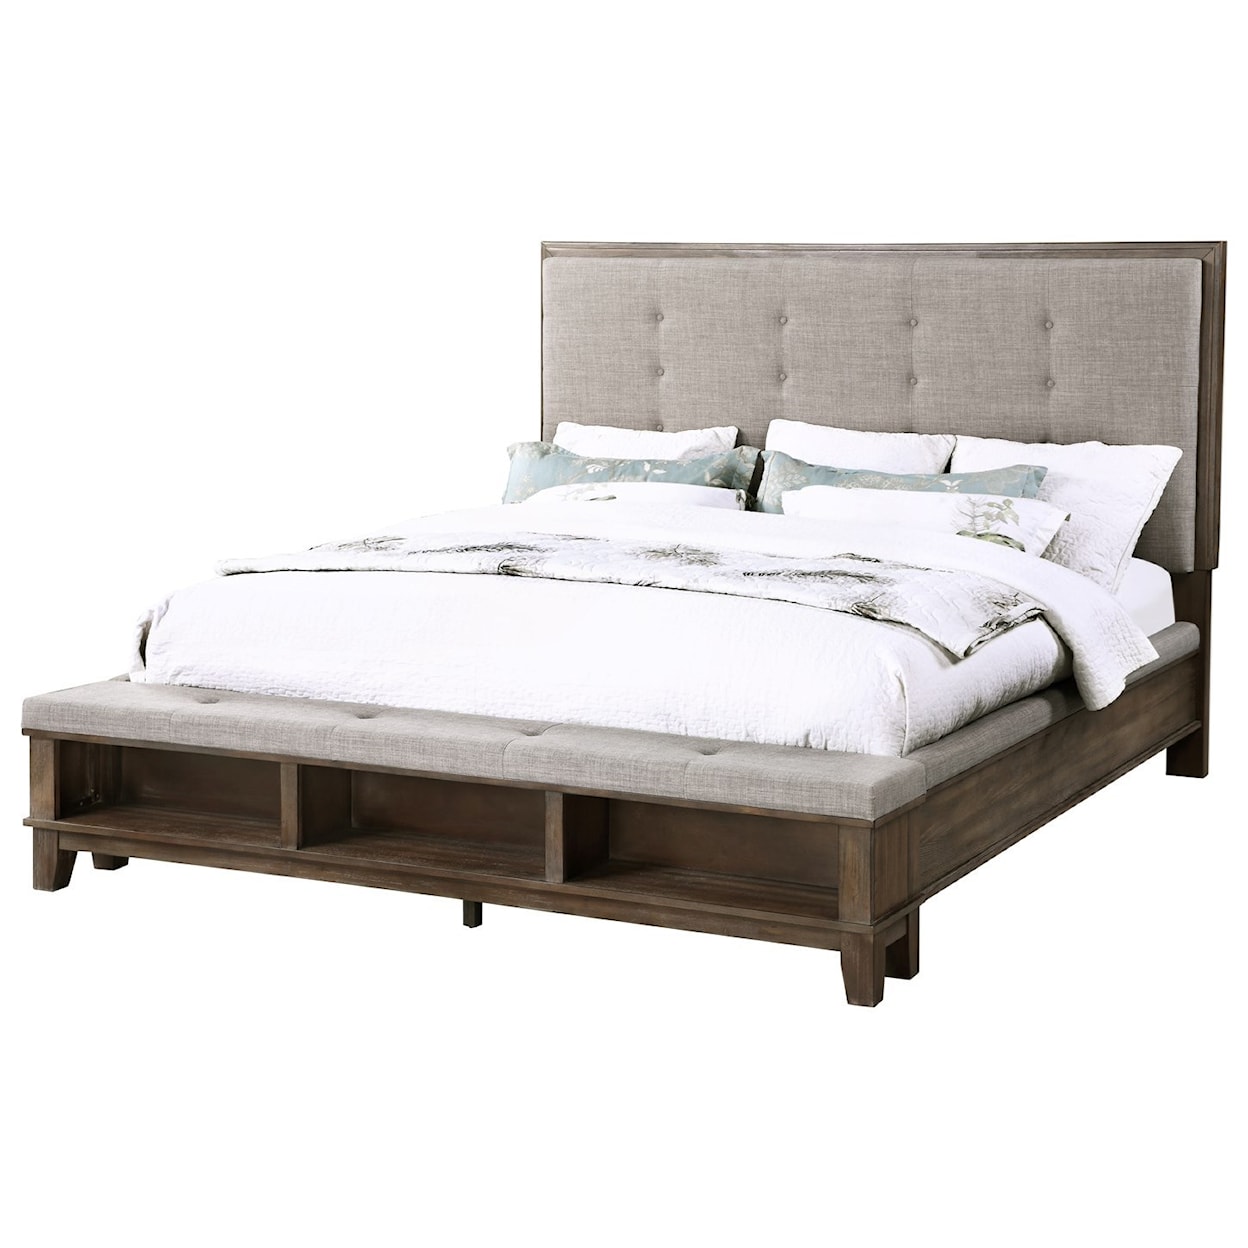 New Classic Furniture Cagney King Upholstered Bed